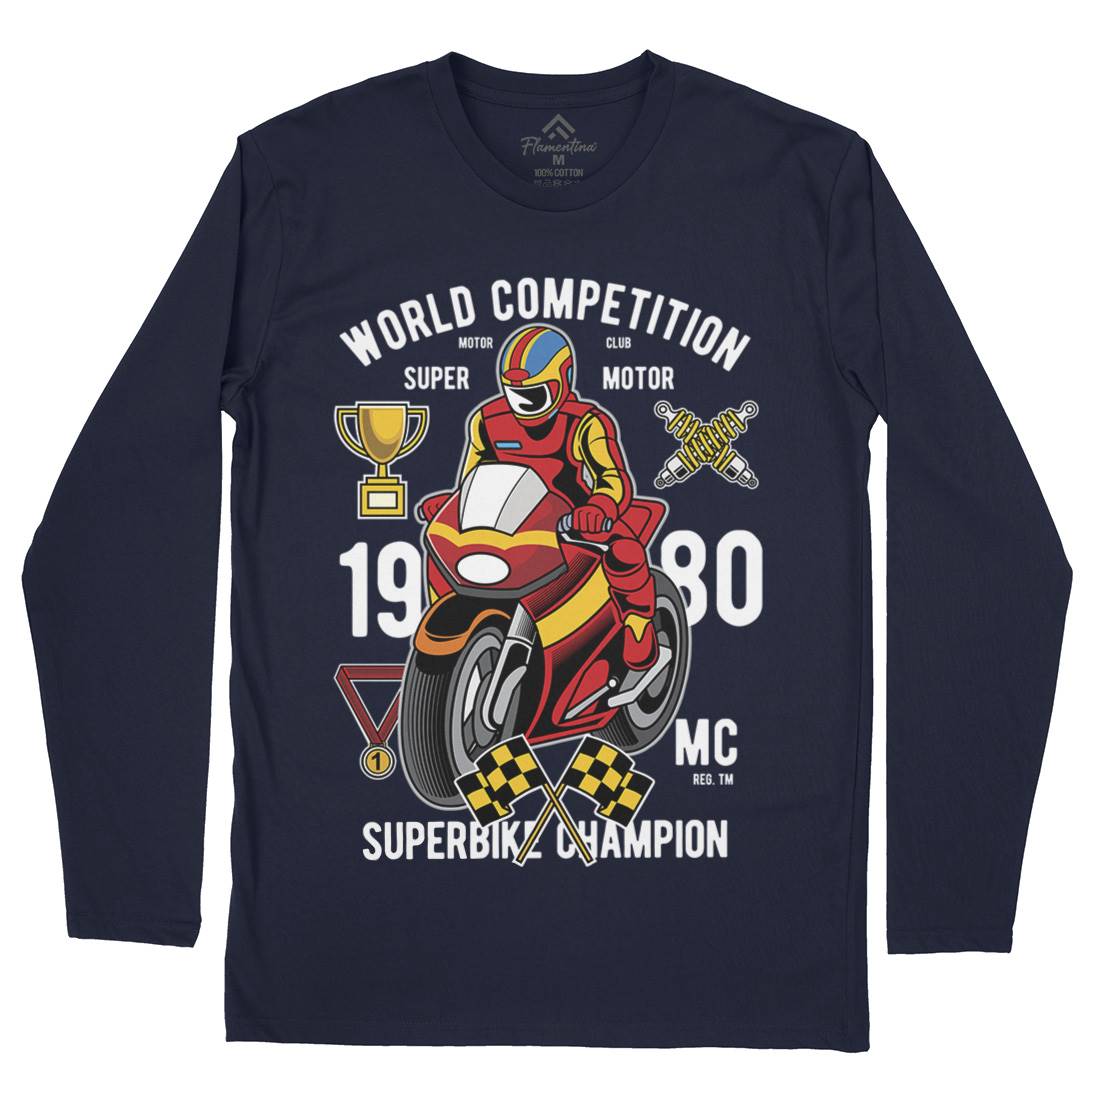 Super Bike World Competition Mens Long Sleeve T-Shirt Motorcycles C458